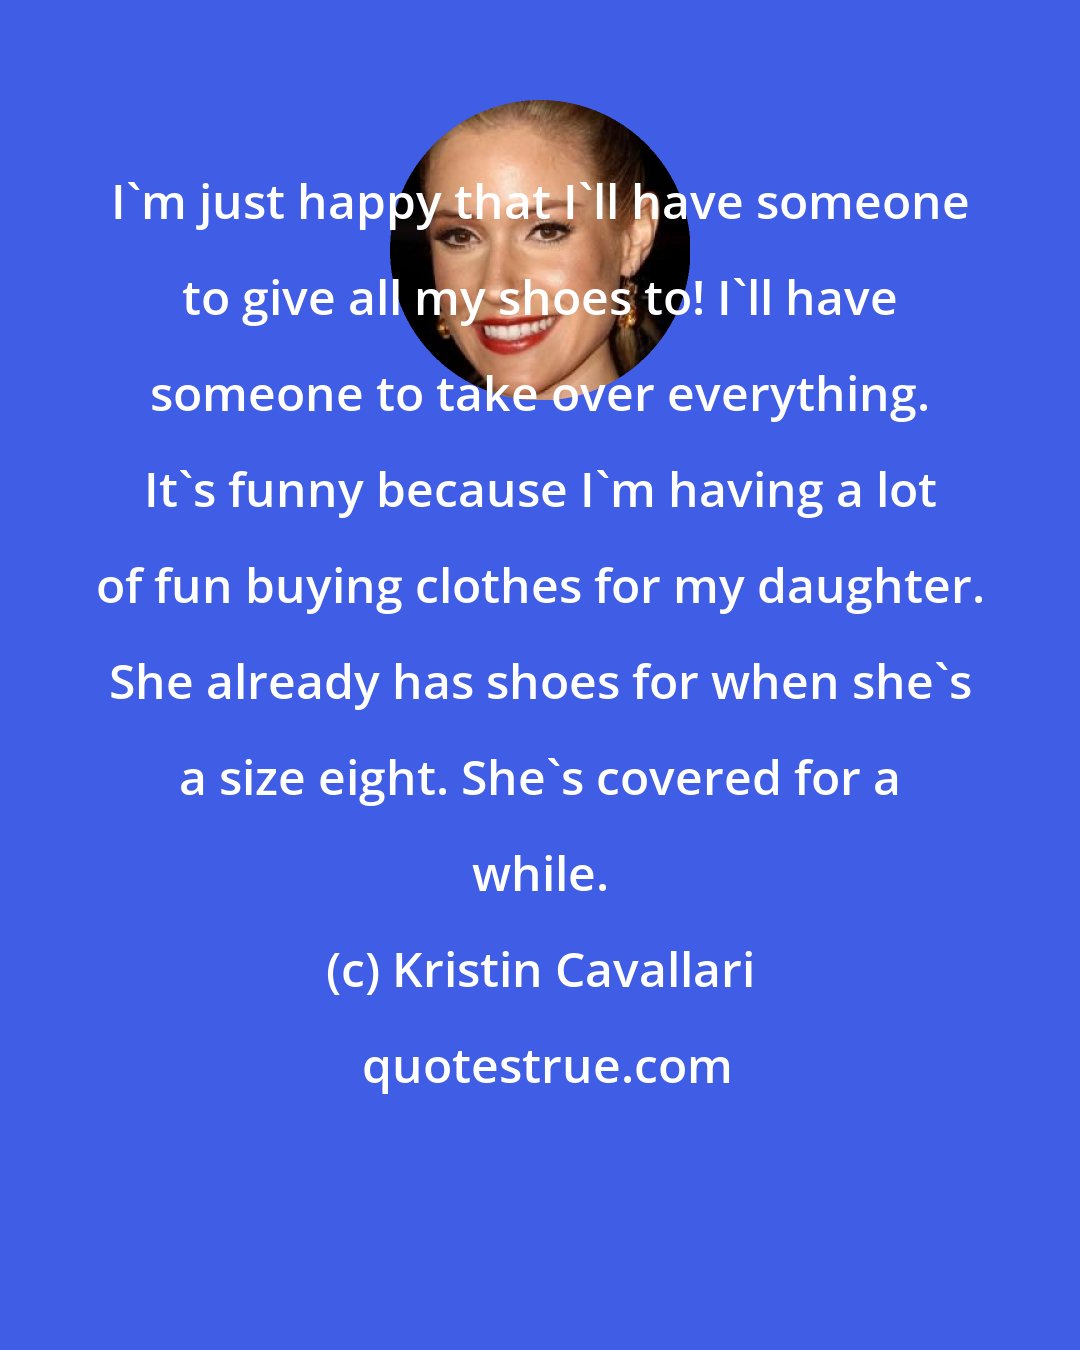 Kristin Cavallari: I'm just happy that I'll have someone to give all my shoes to! I'll have someone to take over everything. It's funny because I'm having a lot of fun buying clothes for my daughter. She already has shoes for when she's a size eight. She's covered for a while.